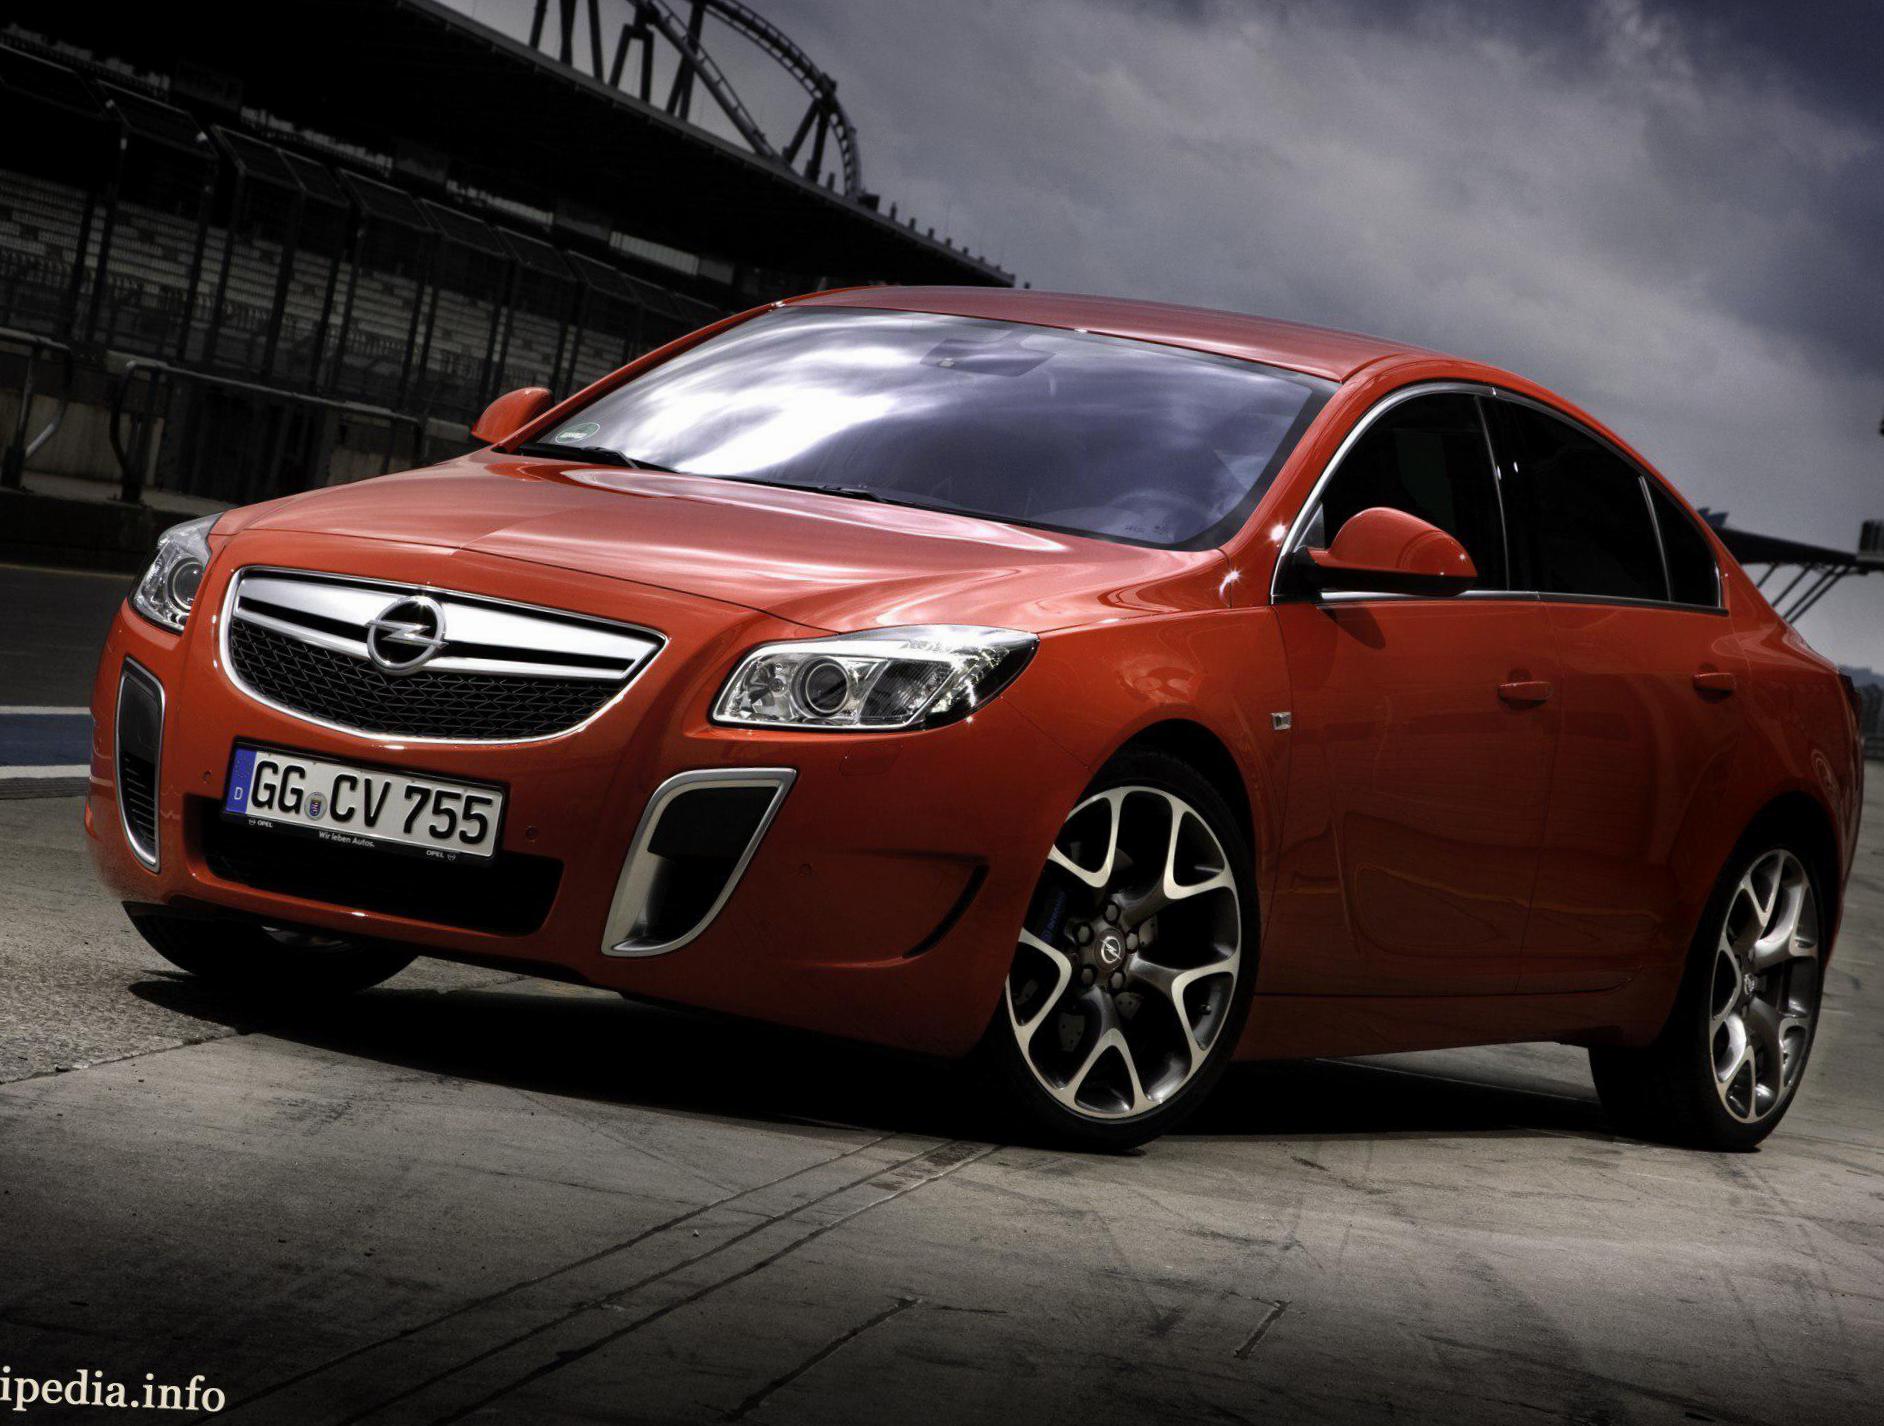 Insignia OPC Hatchback Opel reviews wagon